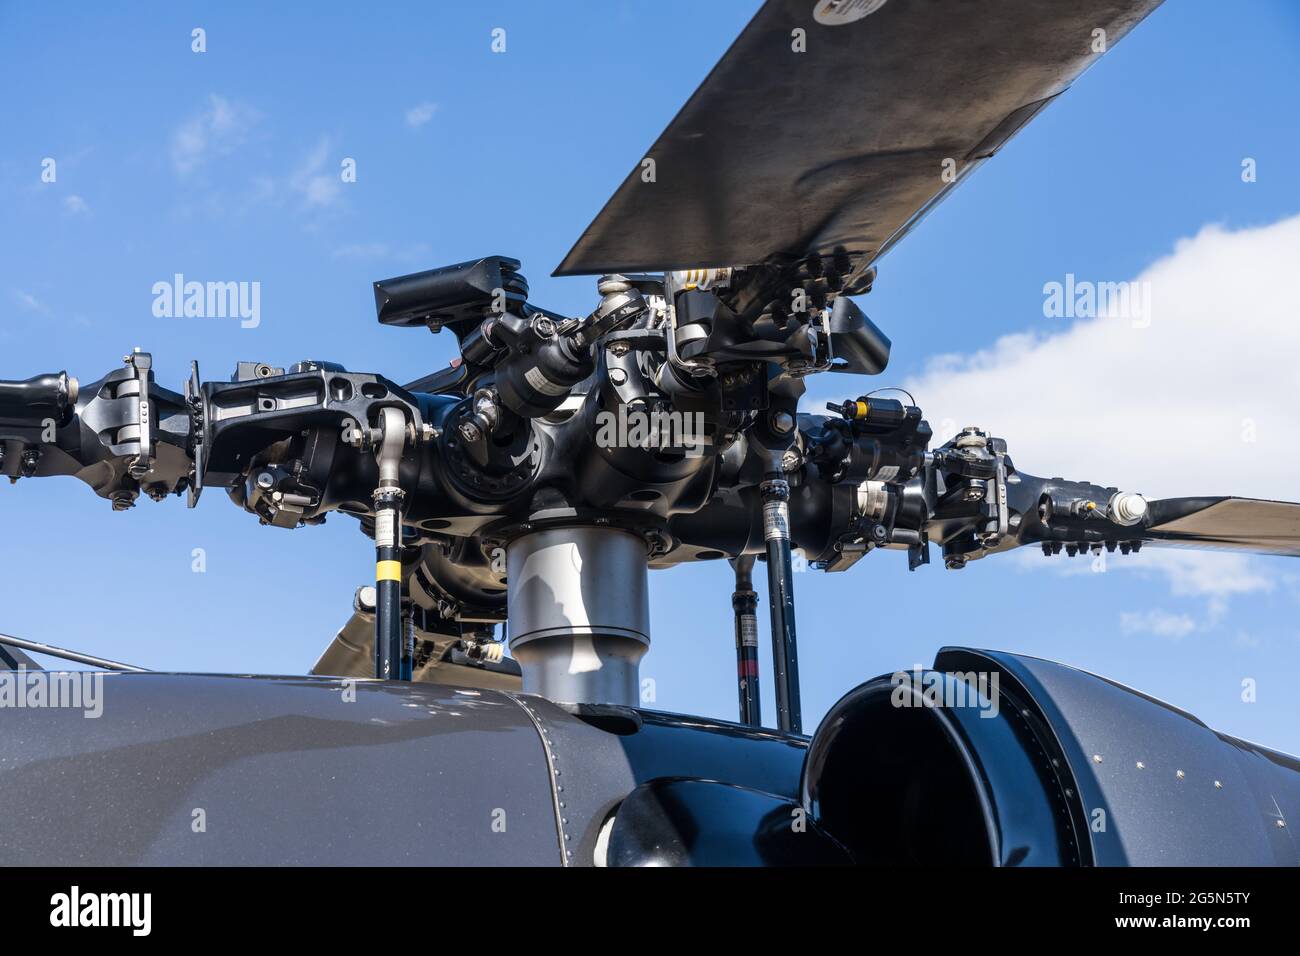 The fully articulated rotor head or rotor hub on a Sikorsky UH-60 helicopter. Stock Photo